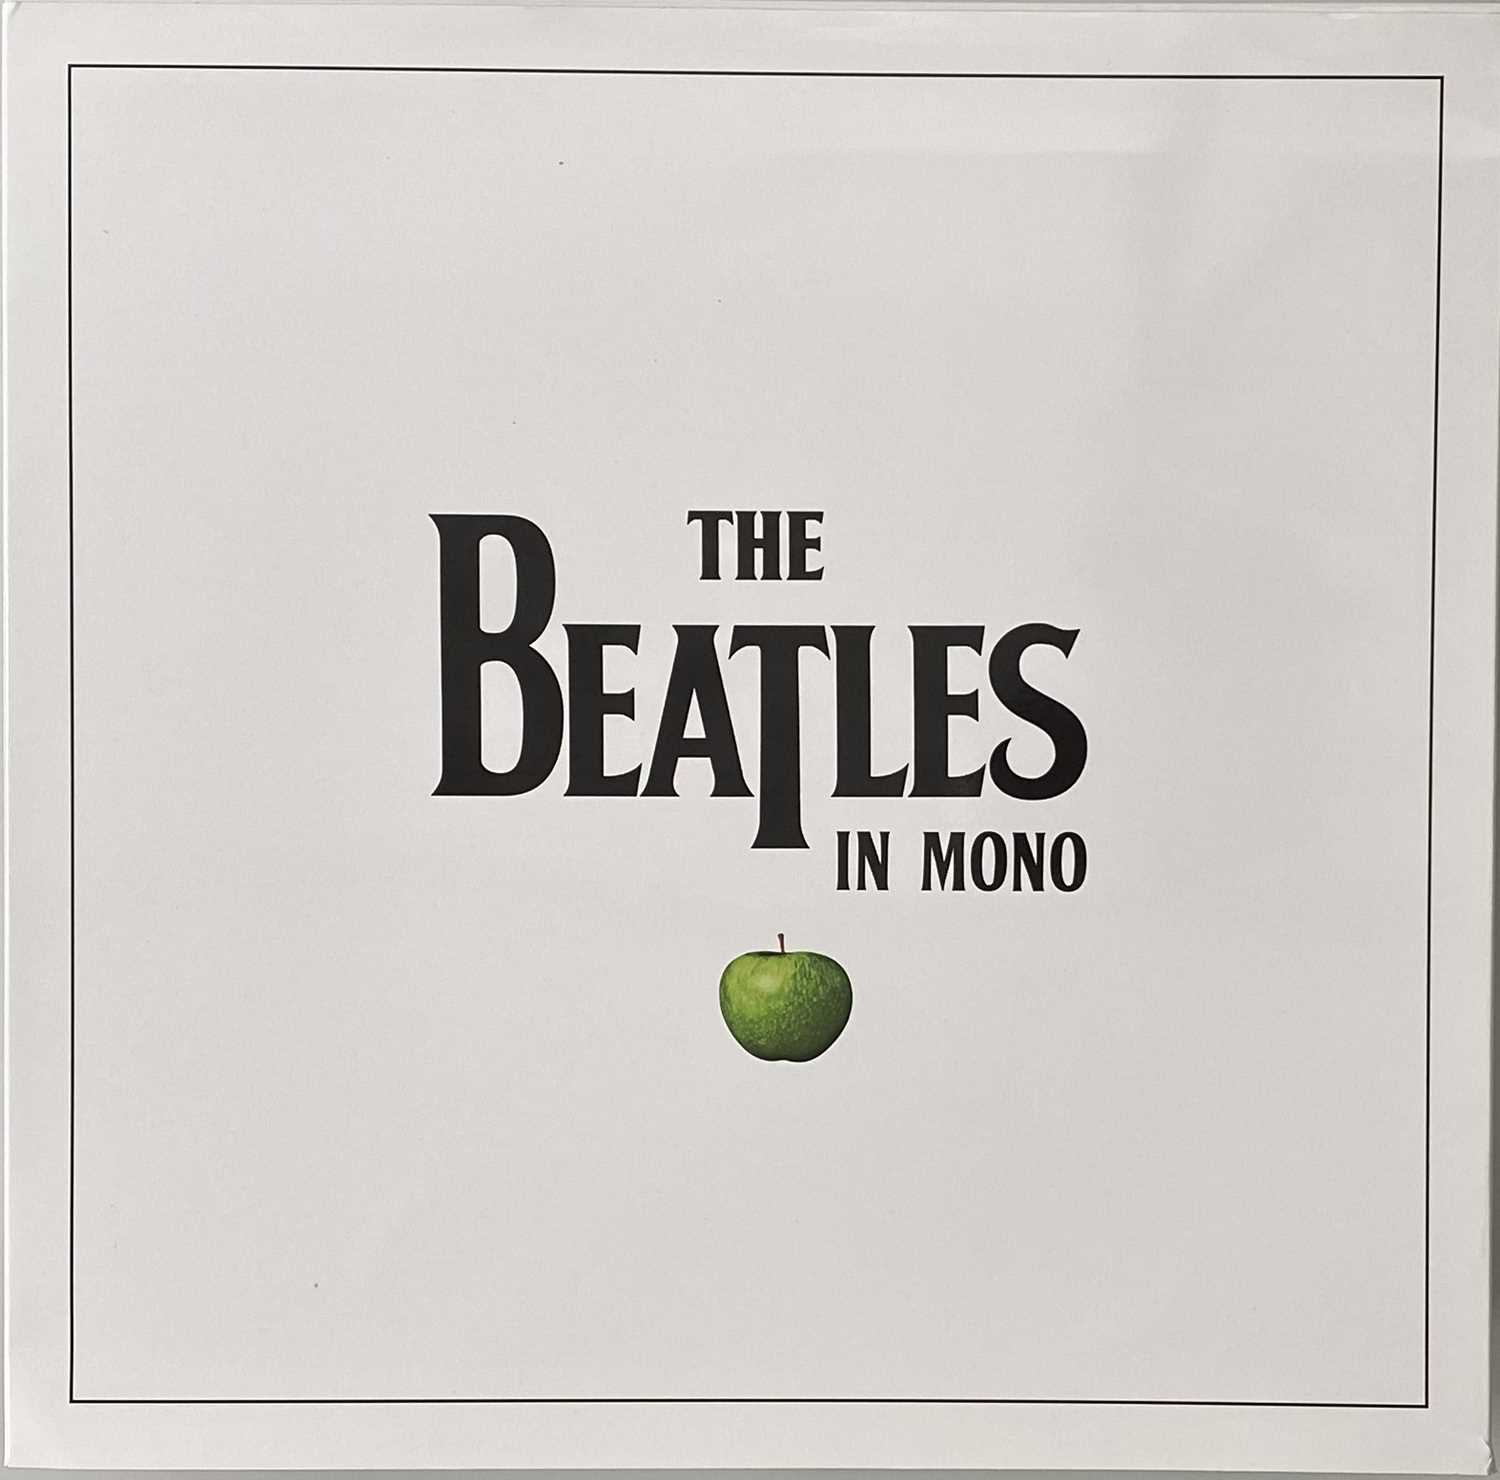 THE BEATLES IN MONO - LIMITED EDITION LP BOX SET (5099963379716).